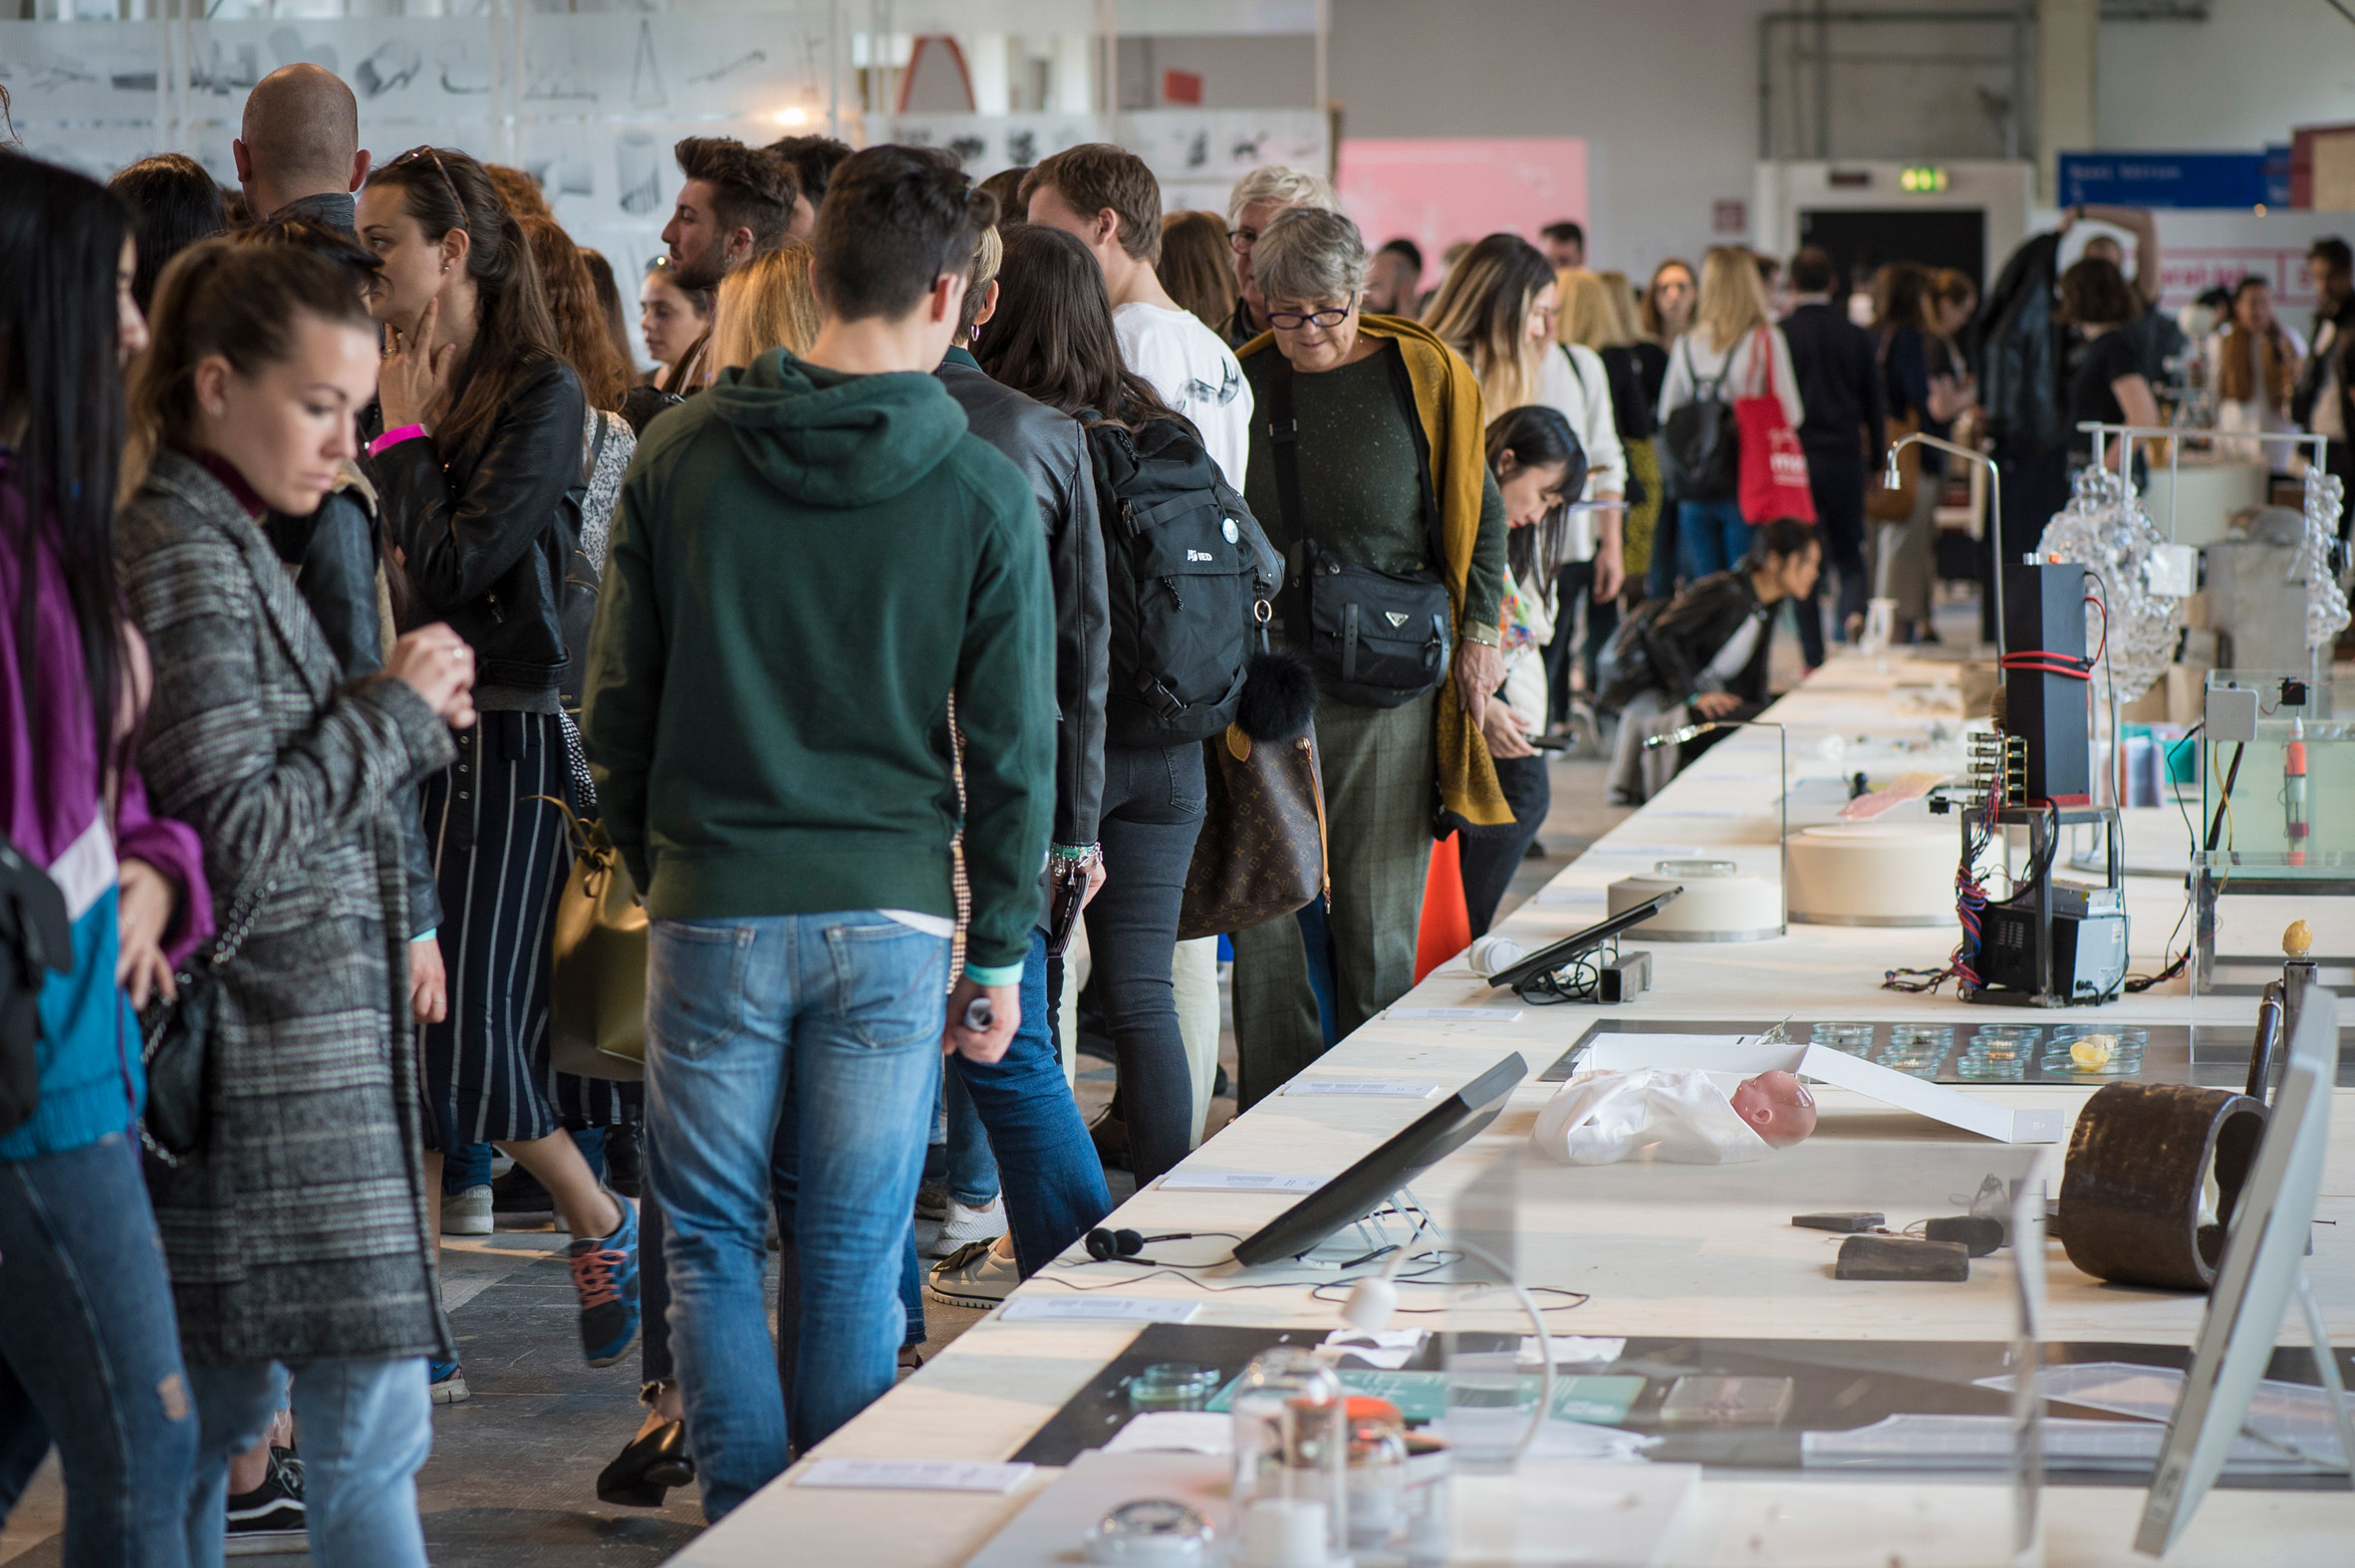 Call for entries to Ventura Future 2020 exhibition at Milan design week